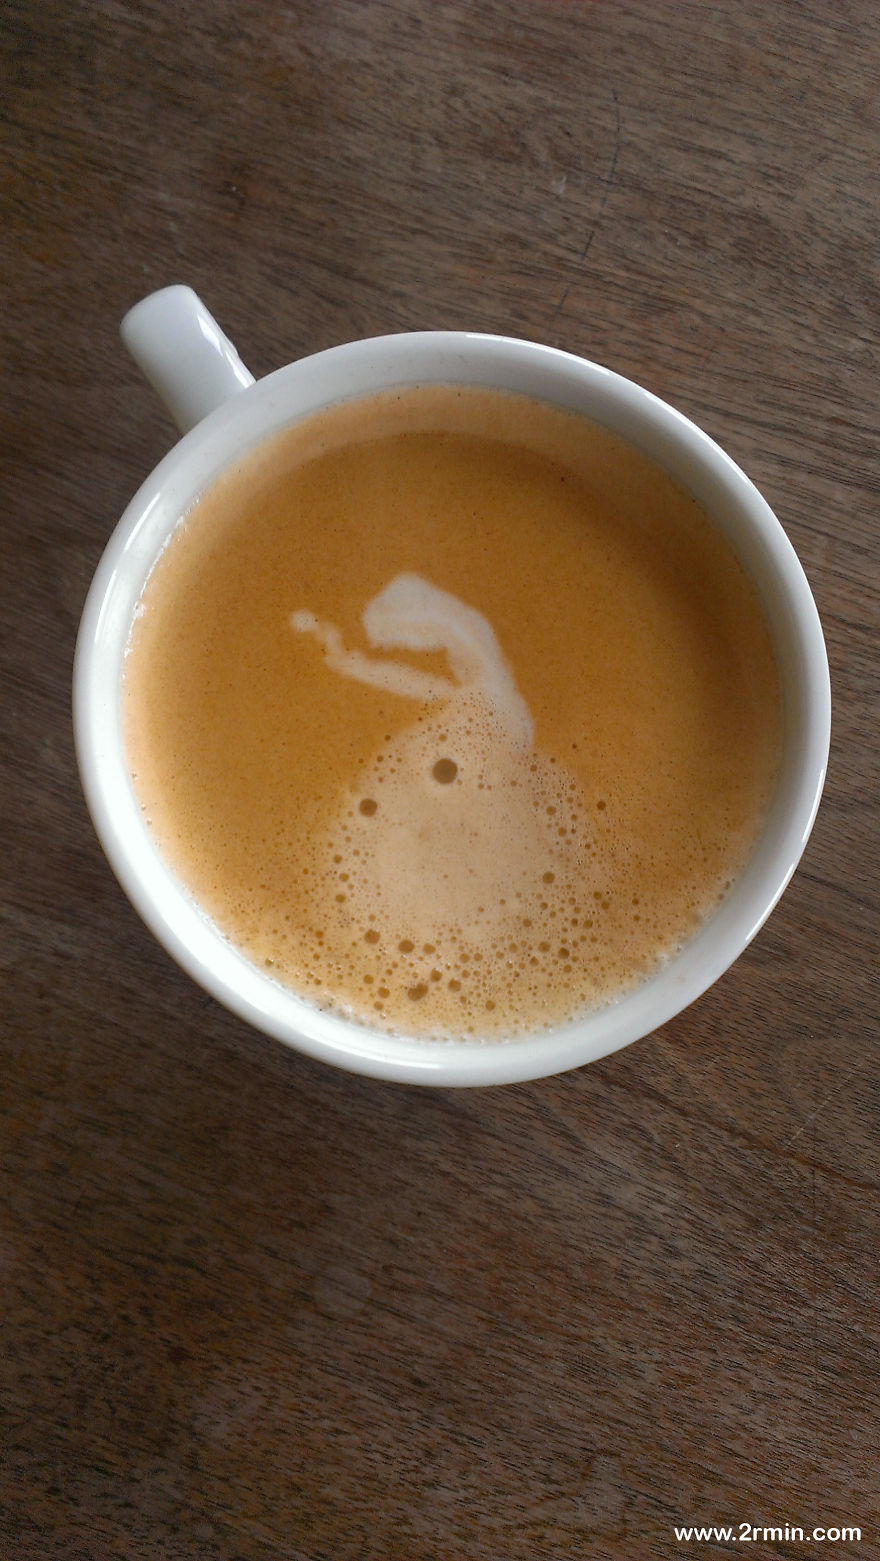 10+ What Have You Found In Your Coffee This Morning?